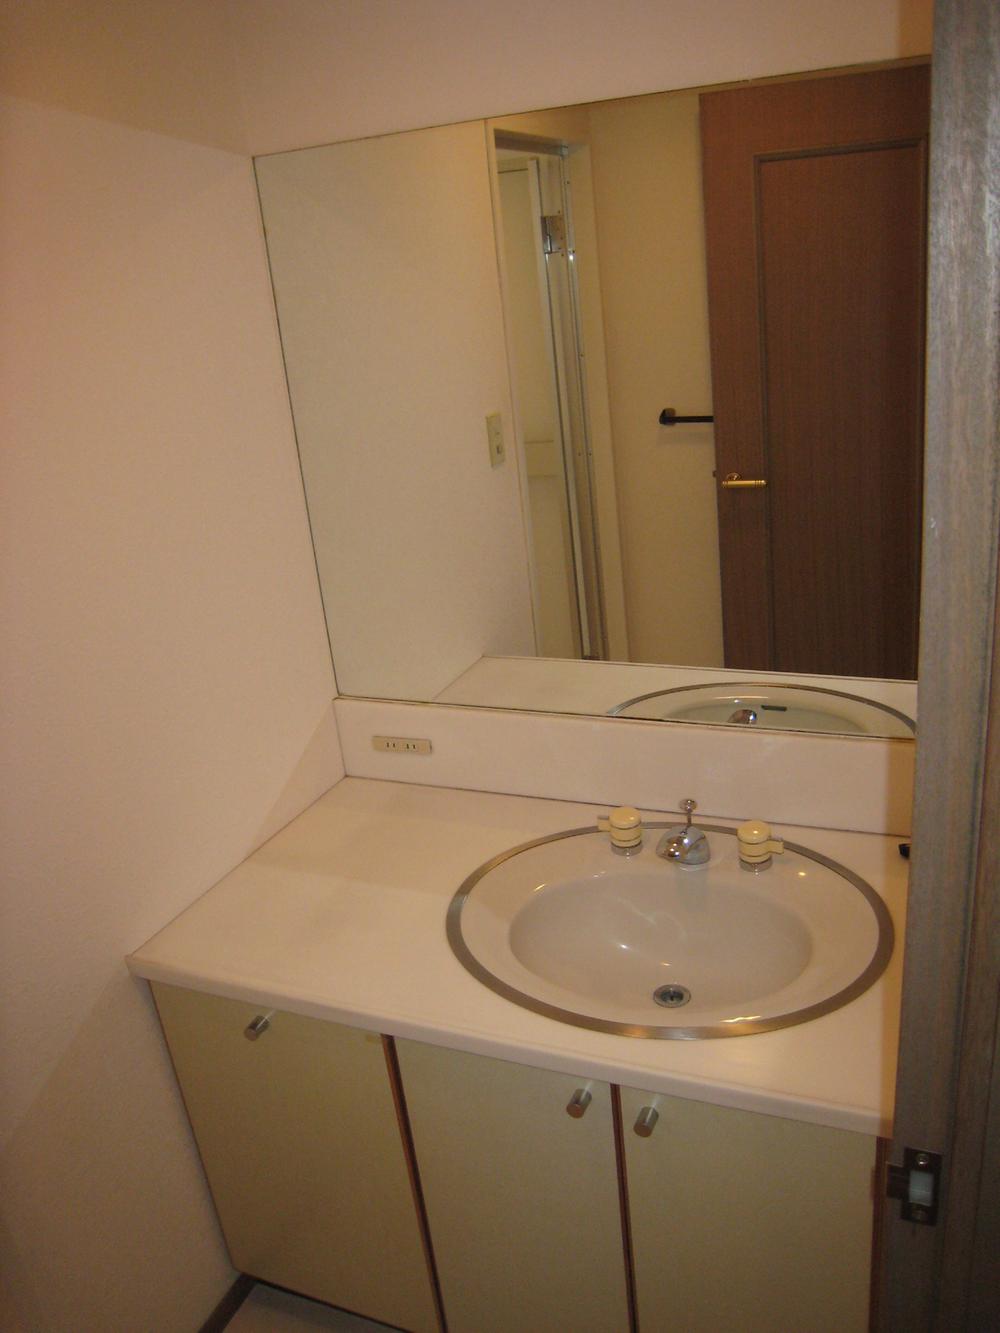 Wash basin, toilet. Vanity with a large mirror